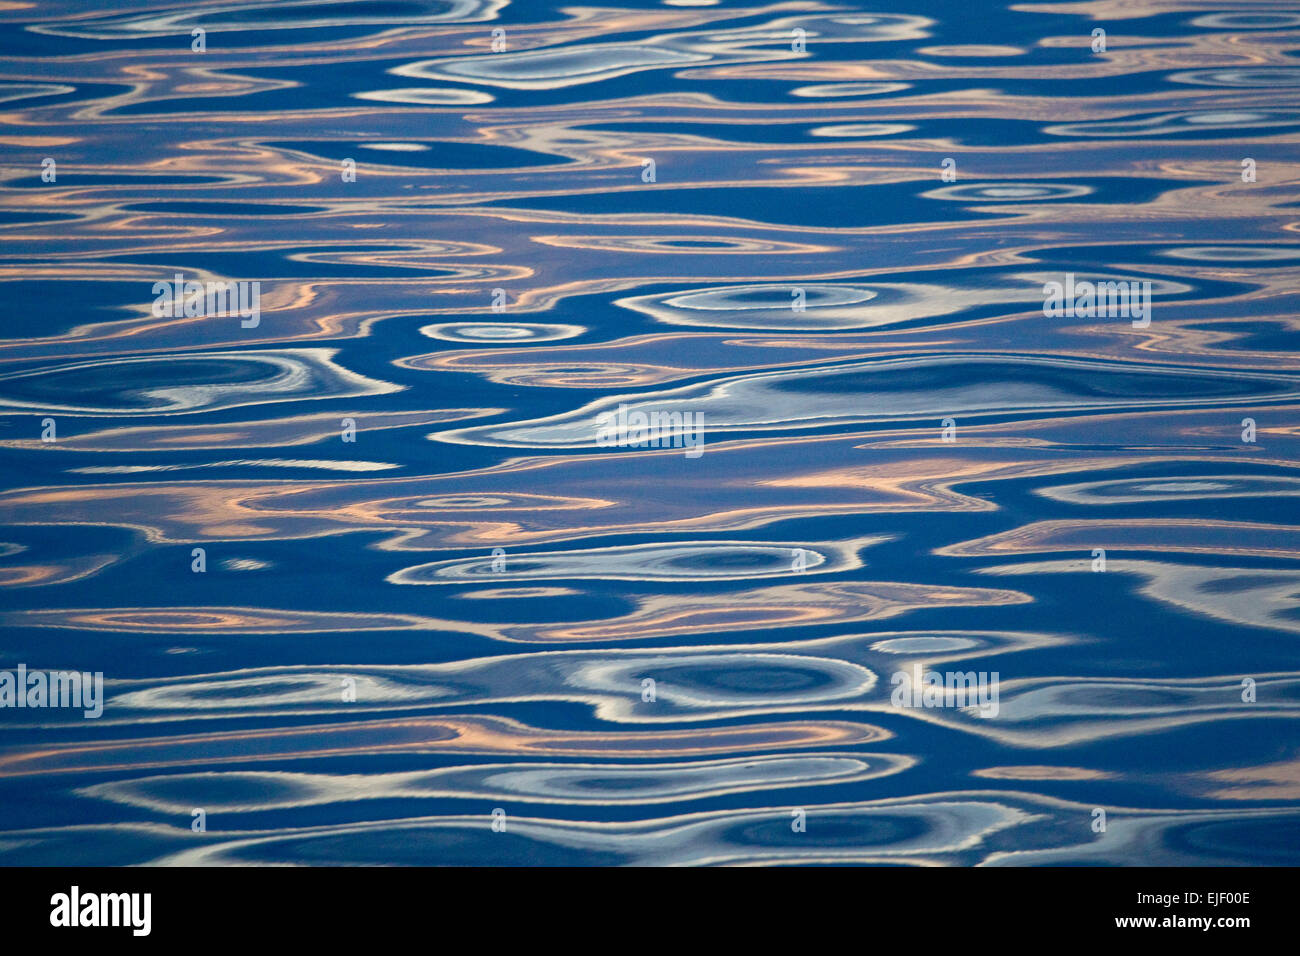 Abstract blue textured water surface background Stock Photo